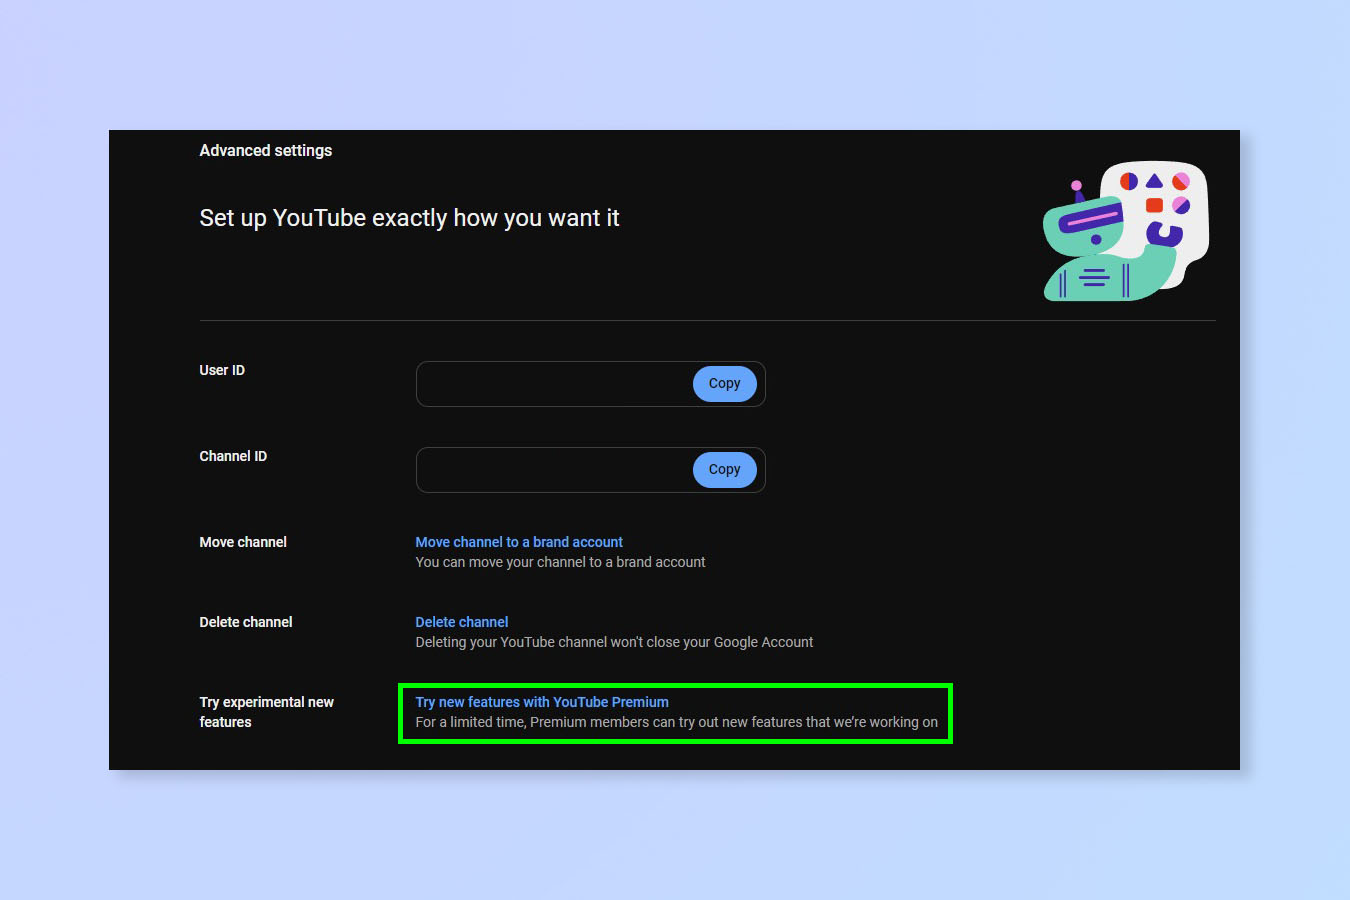 A screenshot showing how to play games on YouTube via a computer browser